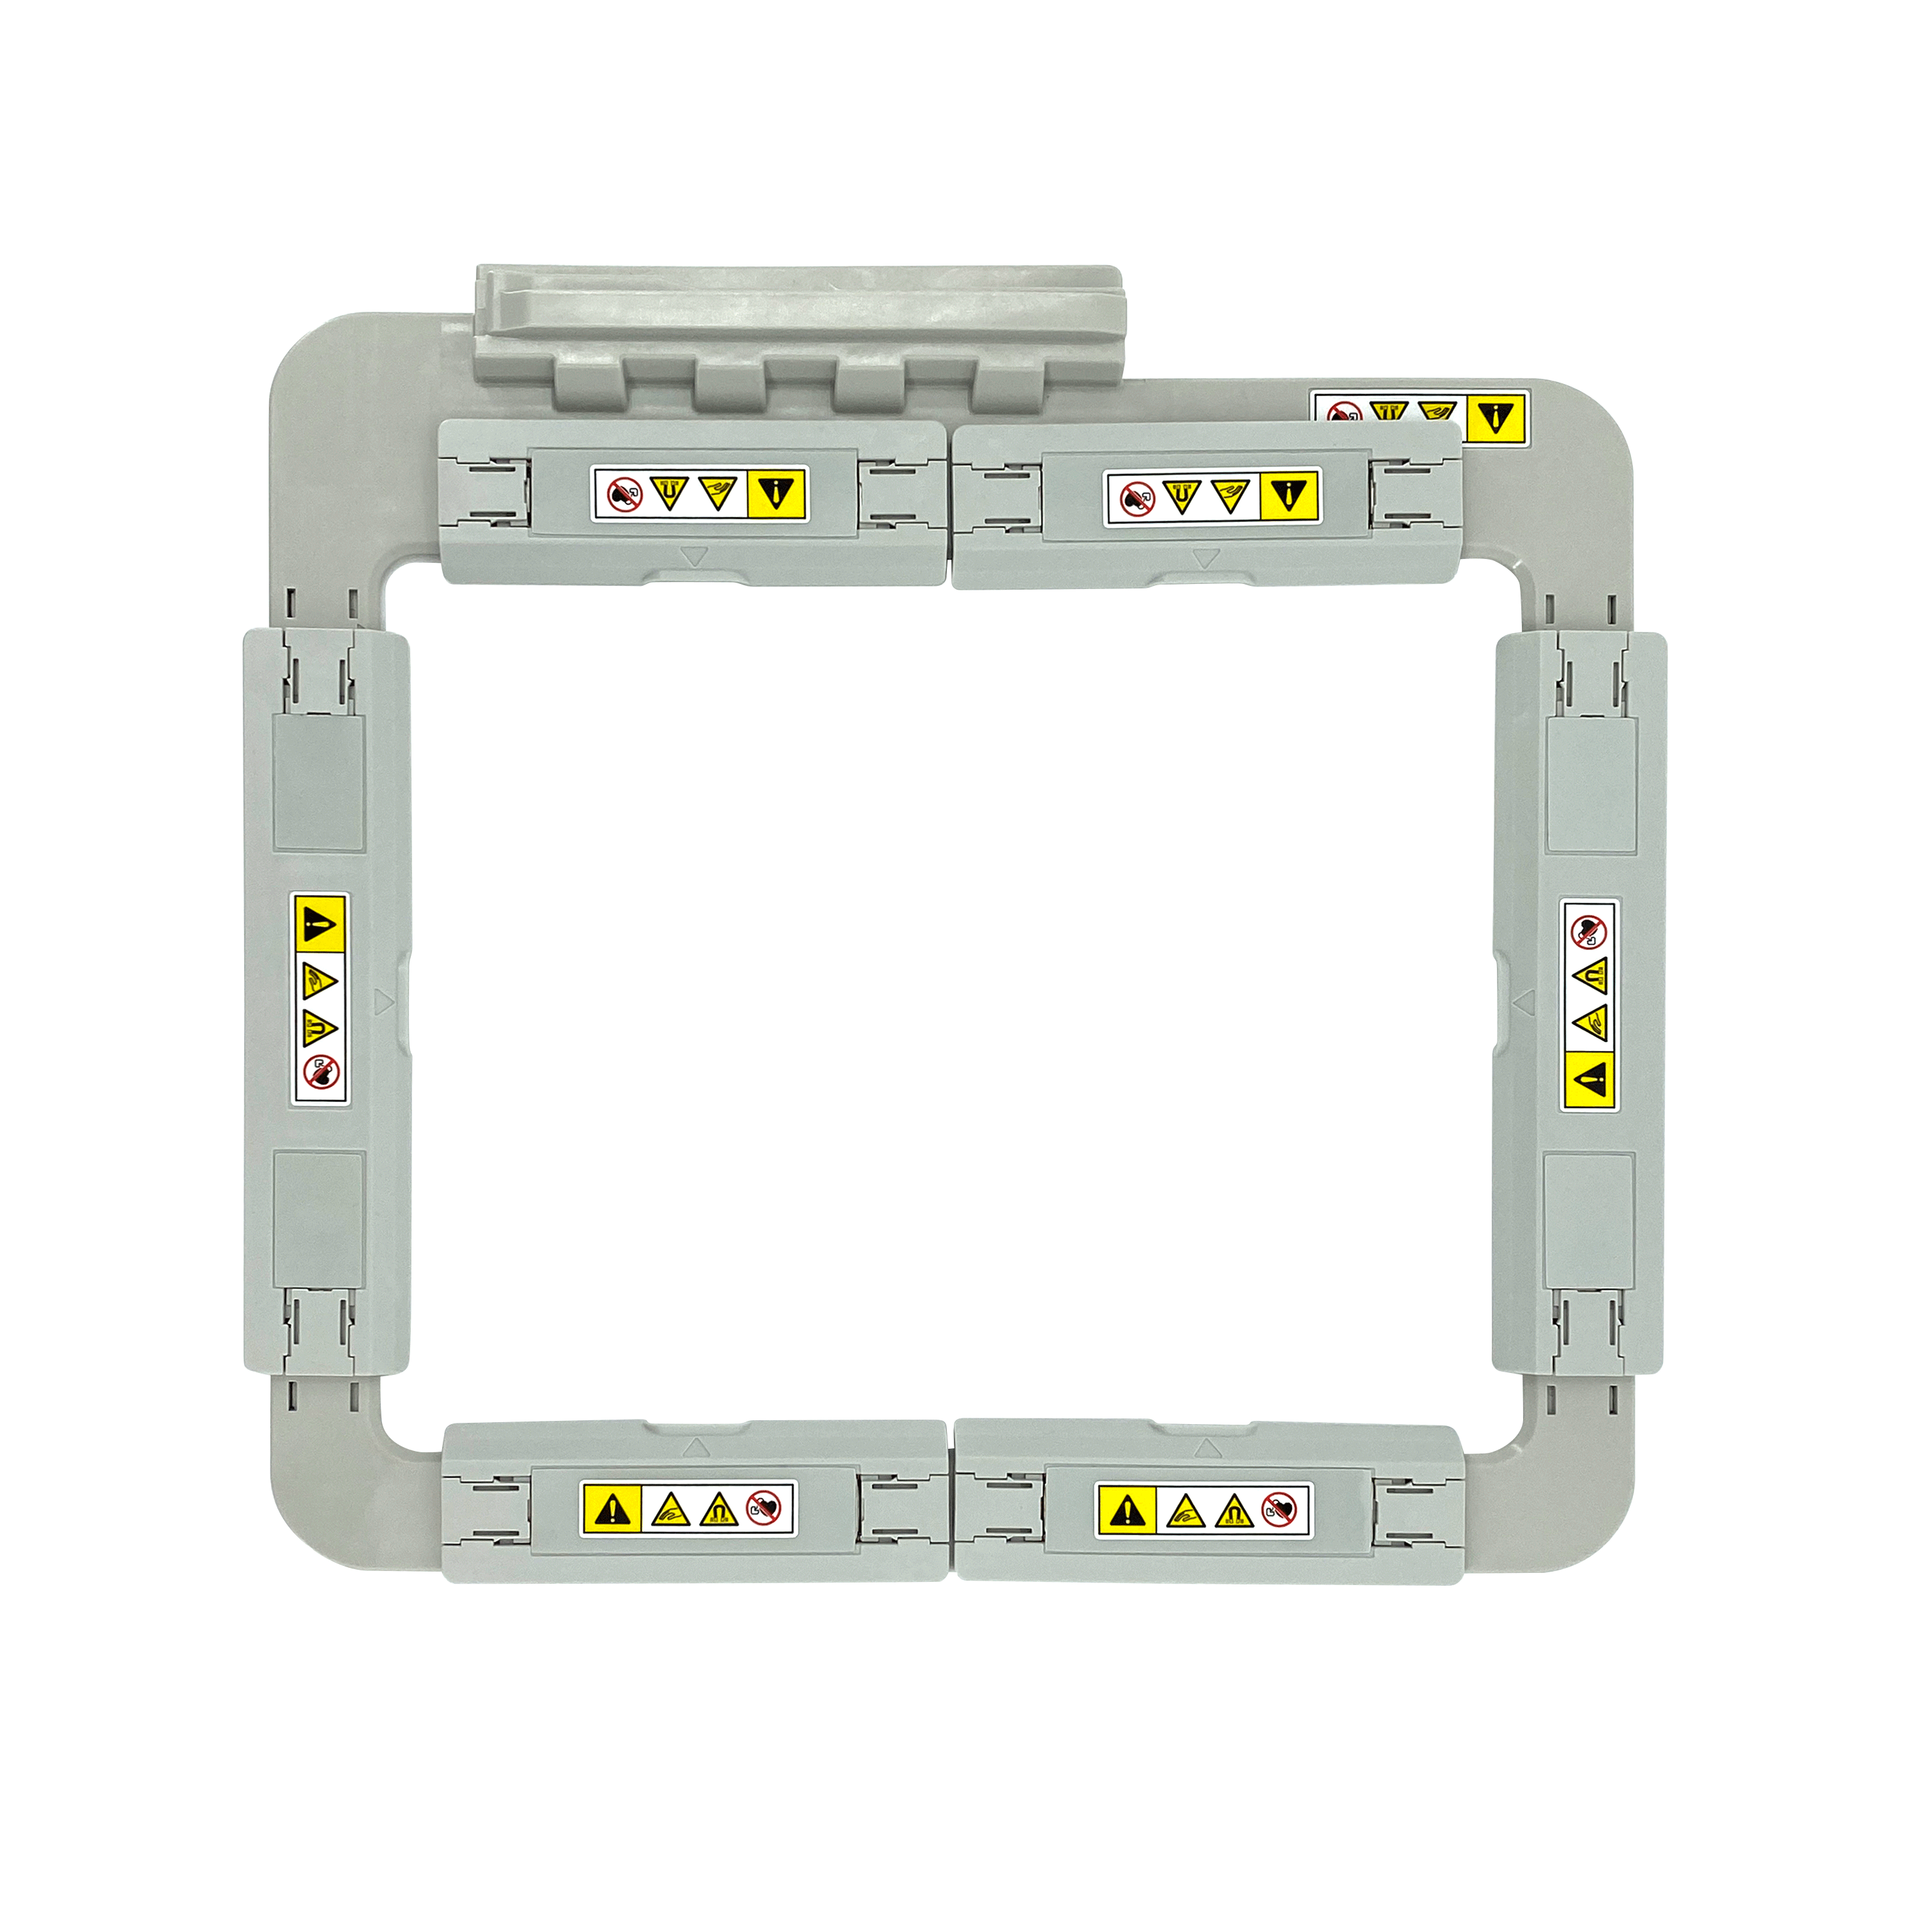 https://www.moores-sew.com/wp-content/uploads/2021/07/5x7magneticframe-main.png